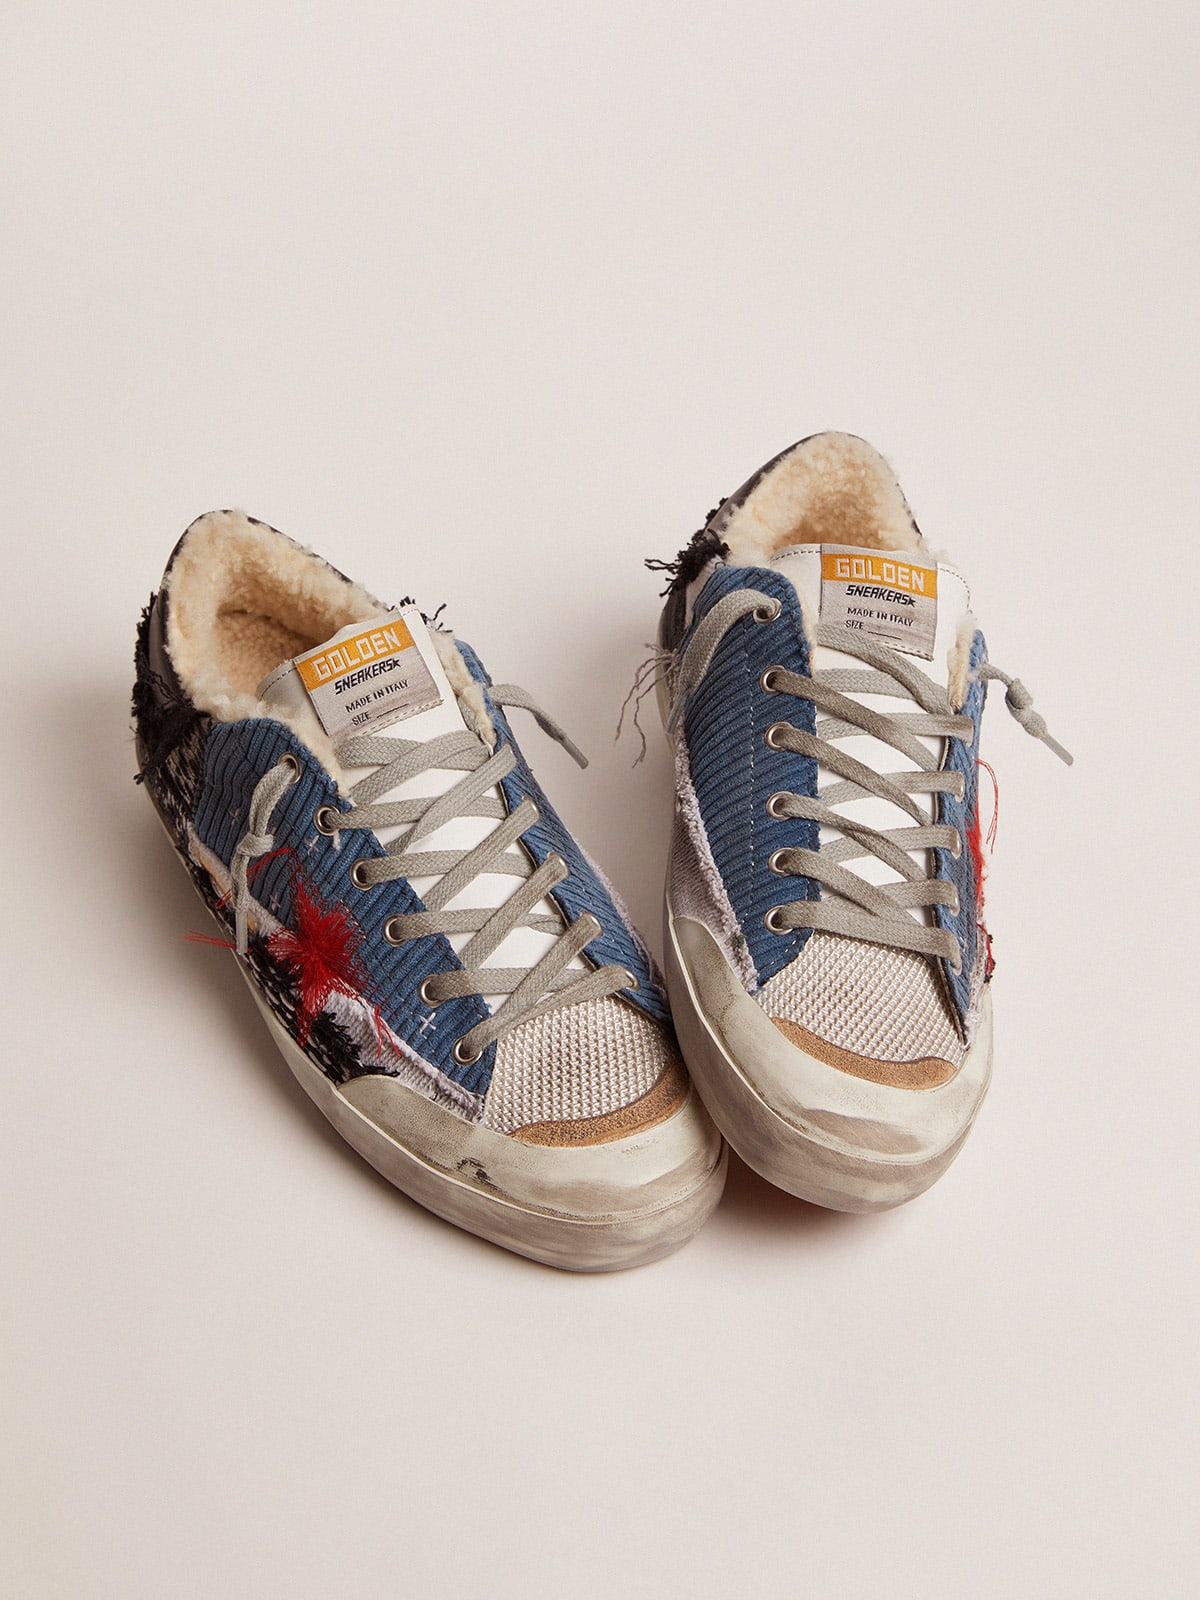 Golden Goose - Super-Star LAB sneakers with patchwork and shearling lining in 